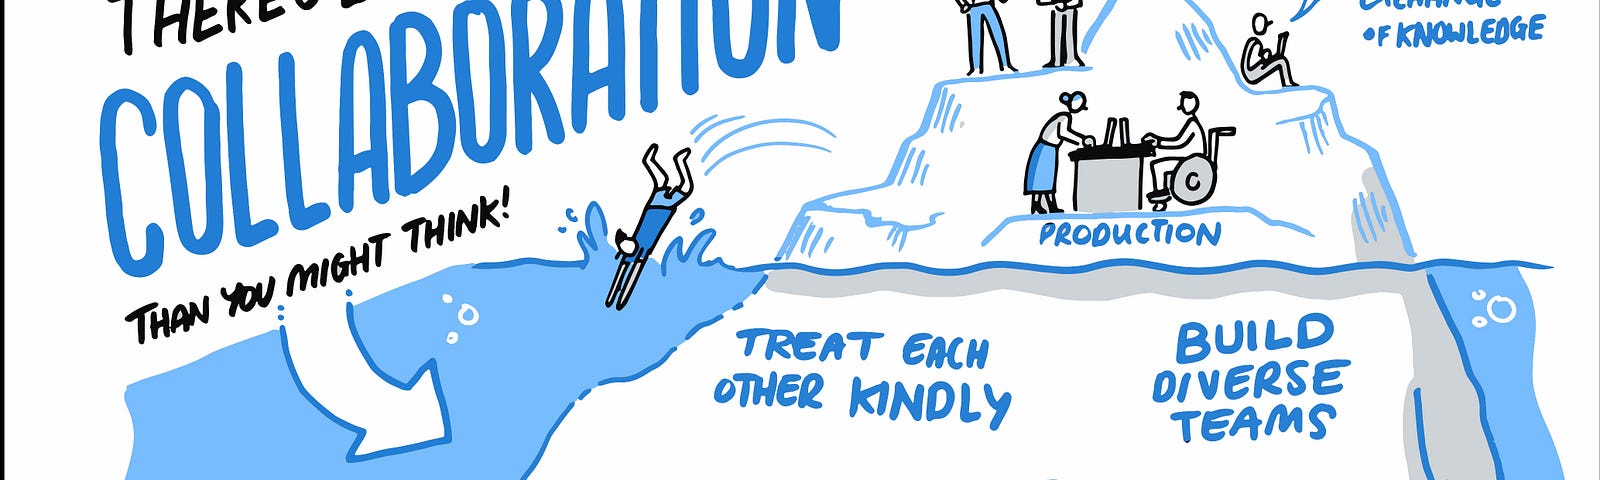 An image depicting that there is more to collaboration than you might think. An iceberg is shown where the tip of the iceberg has values such as production, goals and knowledge, where underneath the iceberg there are values such as code of conduct, building diverse teams, inclusive workspaces, treating eachother kindly and open contributions.